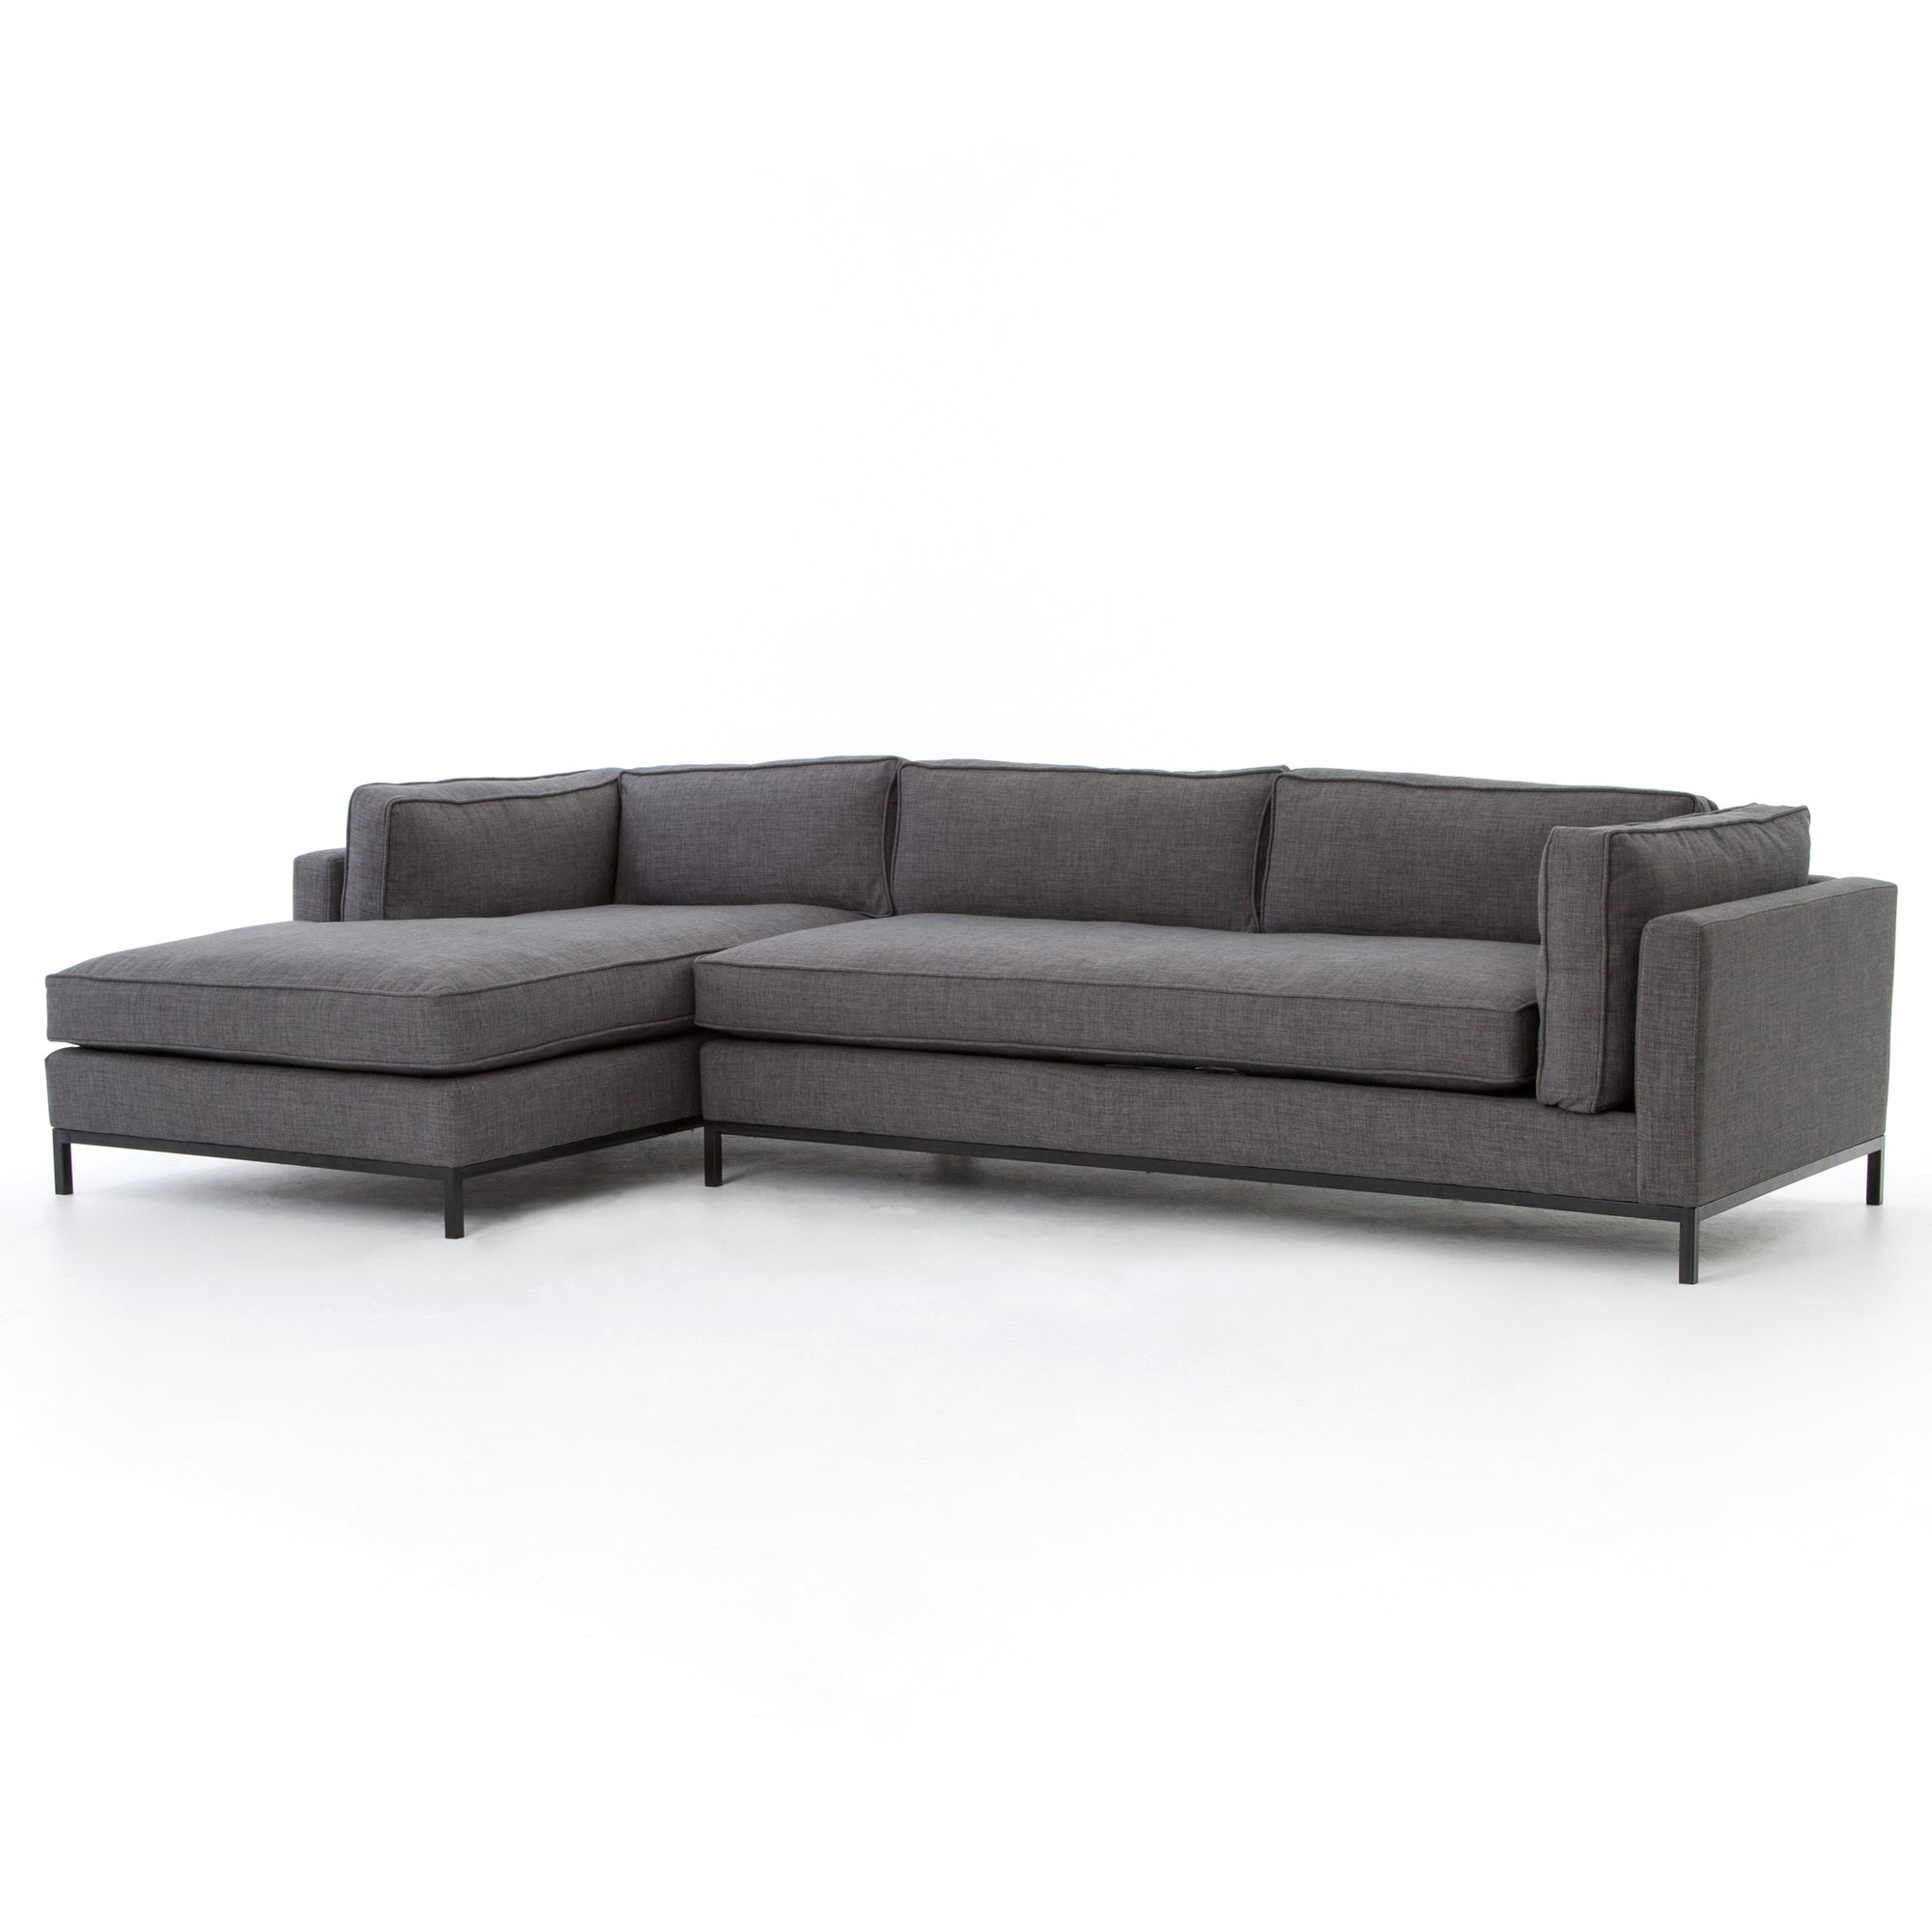 Grammercy 2 Pc Sectional - Laf Chaise - Benn